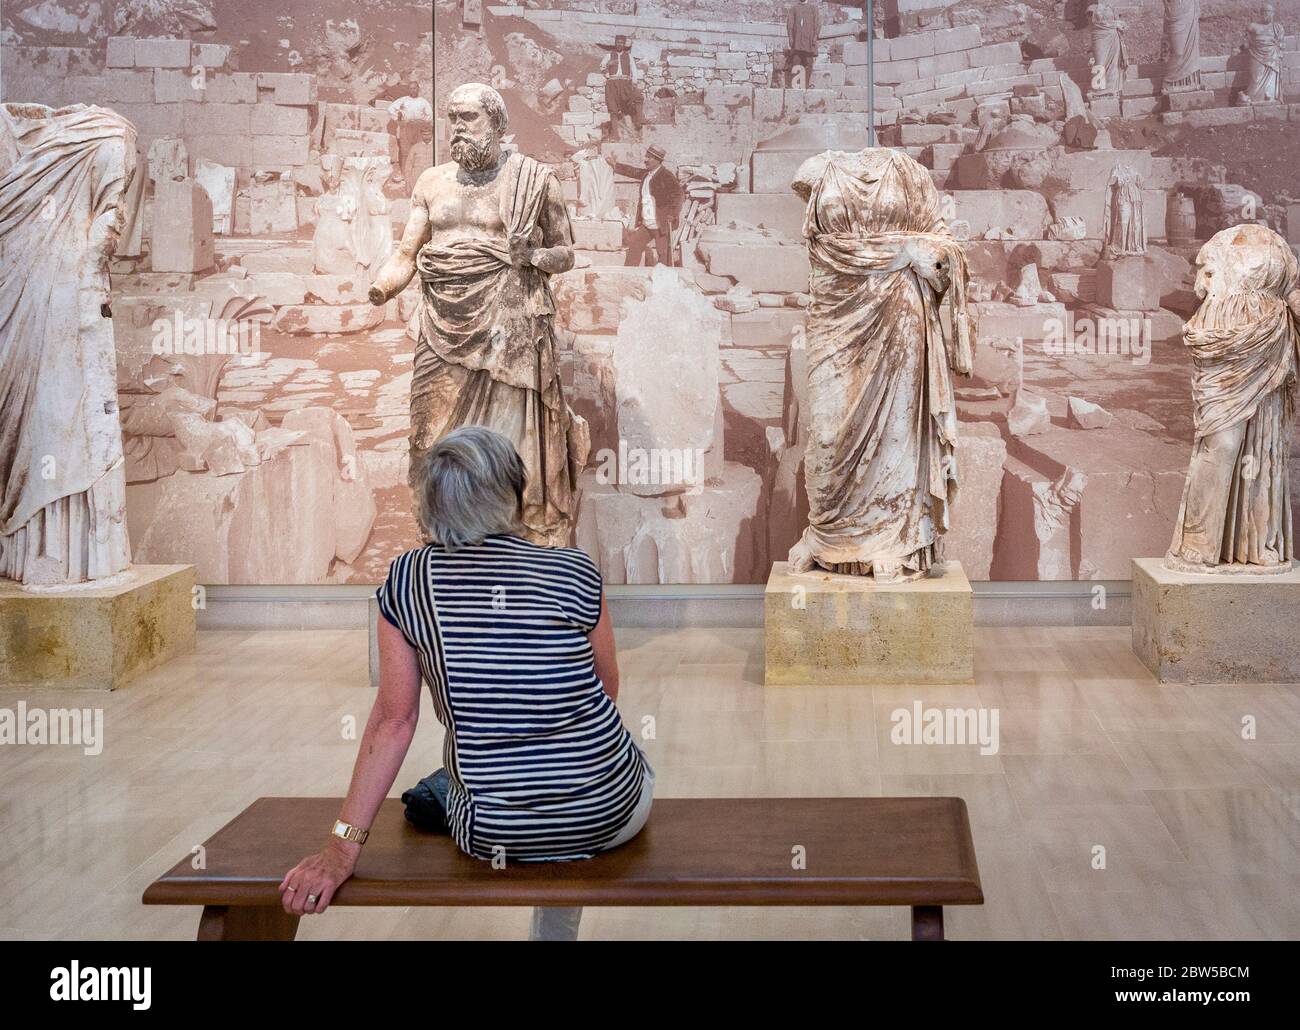 Tourist viewing the statue of the Greek philosopher Plutarch or Plato in the Delphi Archaeological Museum, Greece Stock Photo